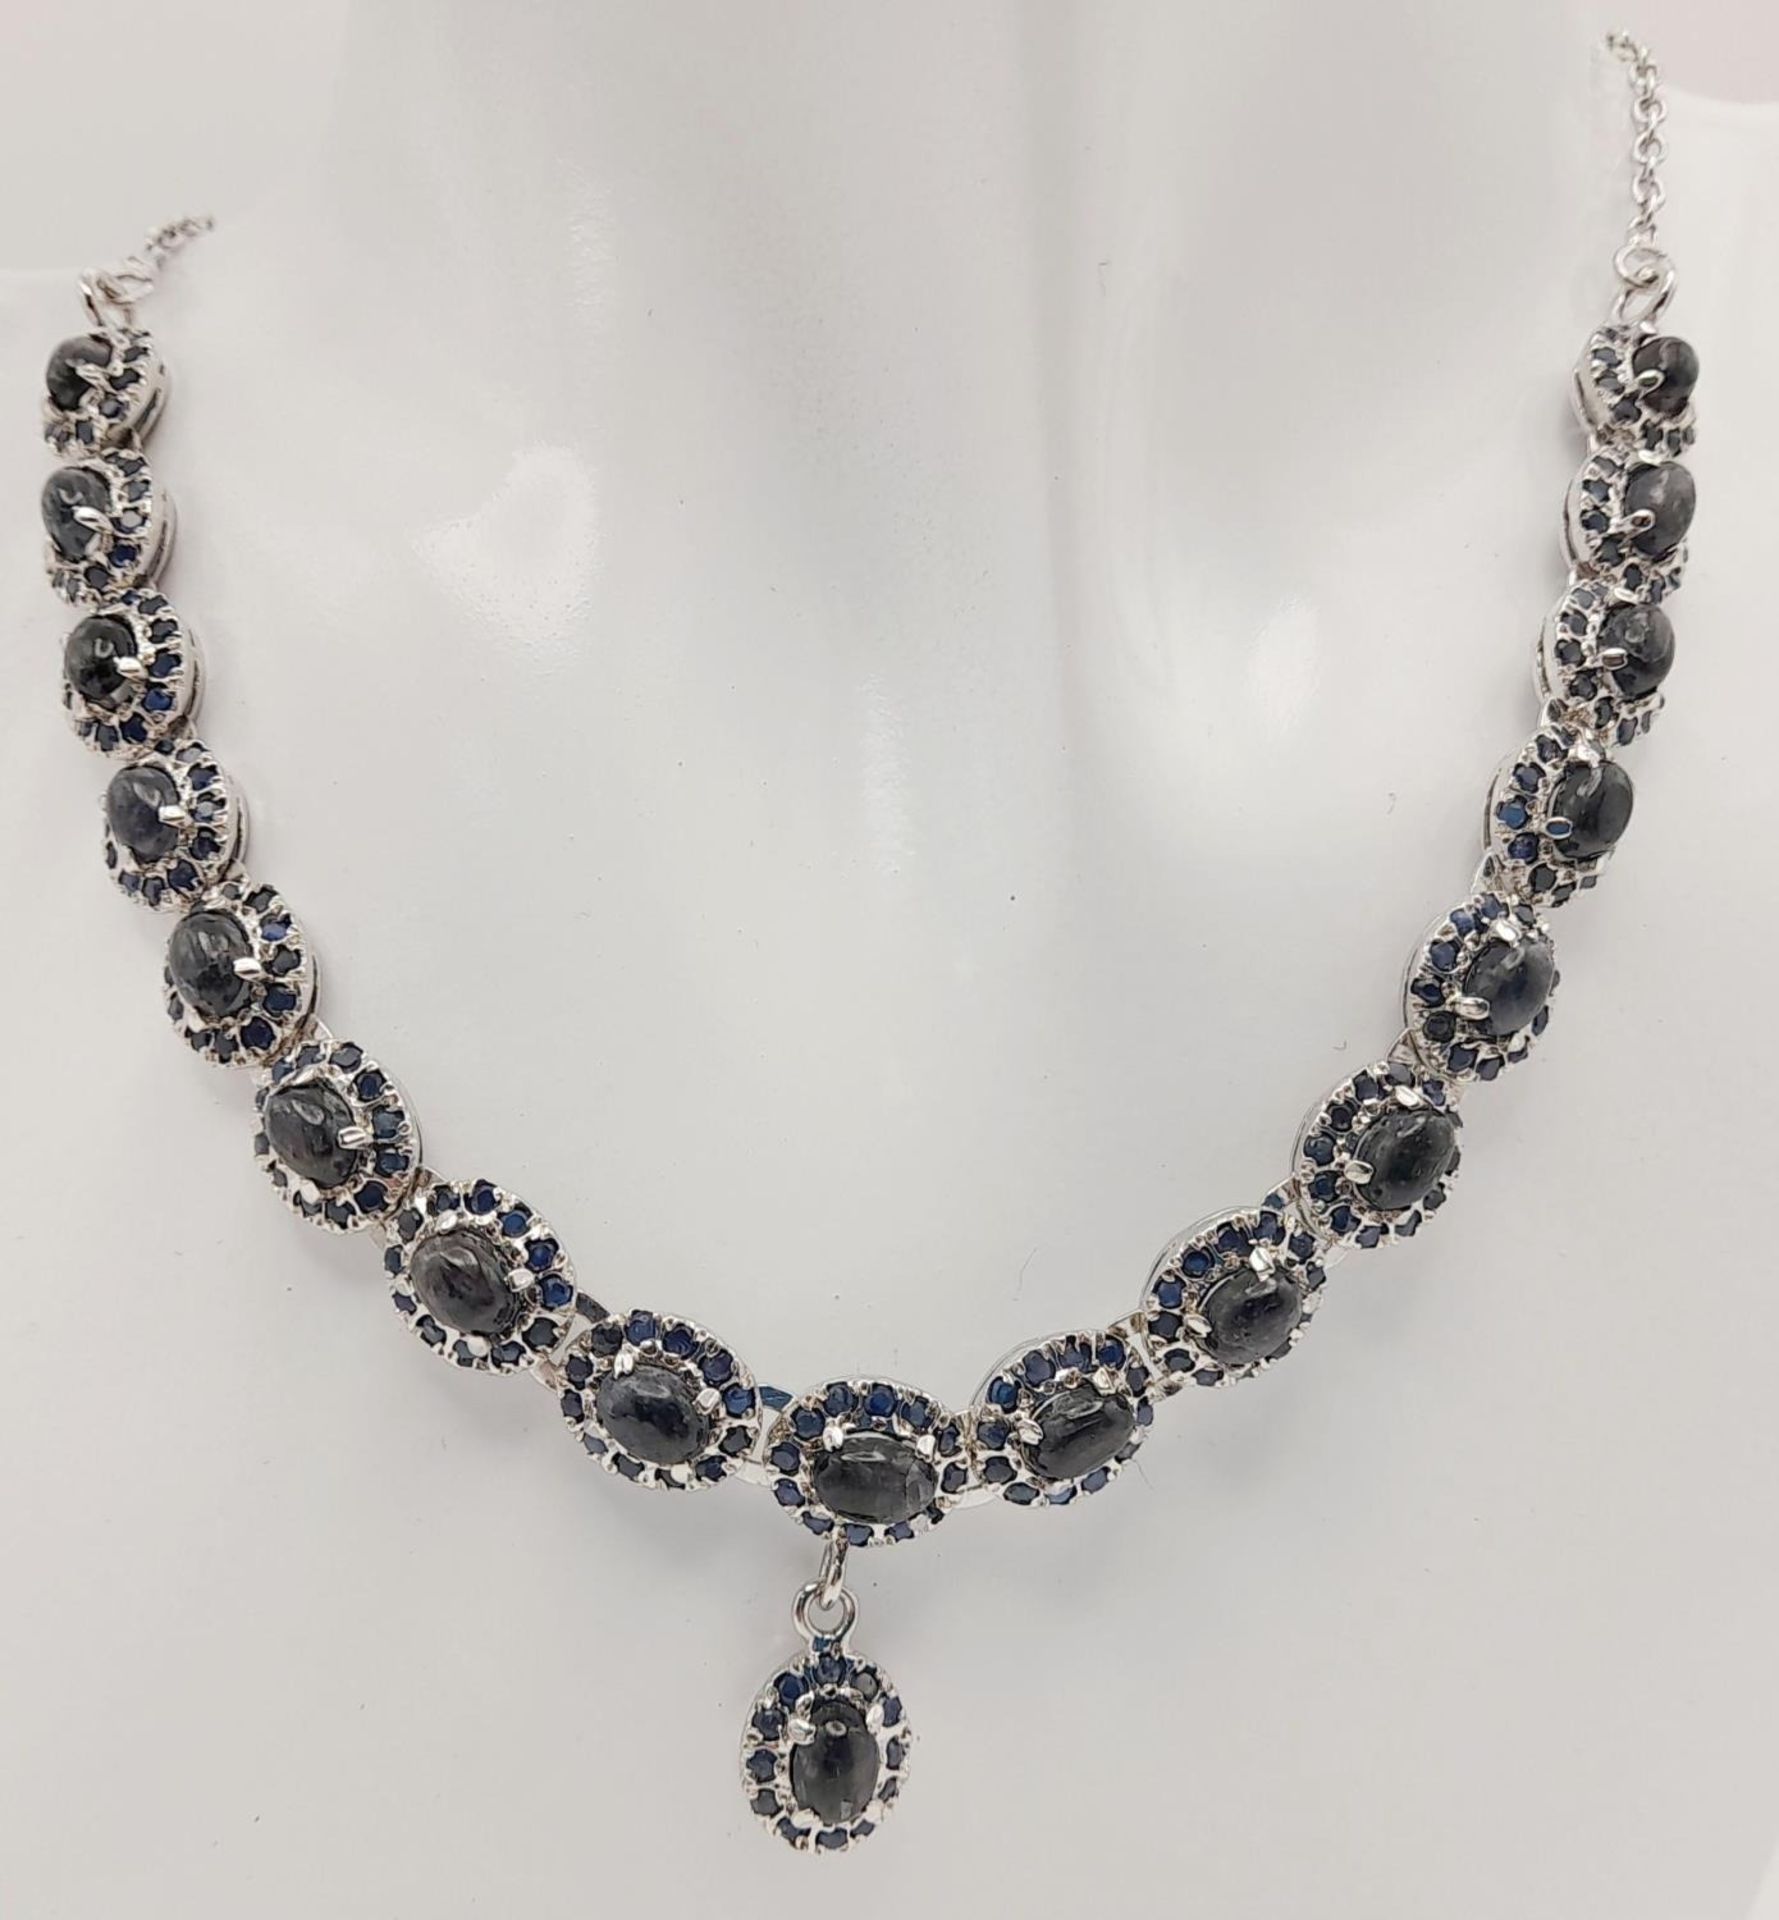 A Blue Sapphire Silver Choker Necklace with Matching Drop Earrings. Both set in 925 sterling silver. - Image 3 of 6